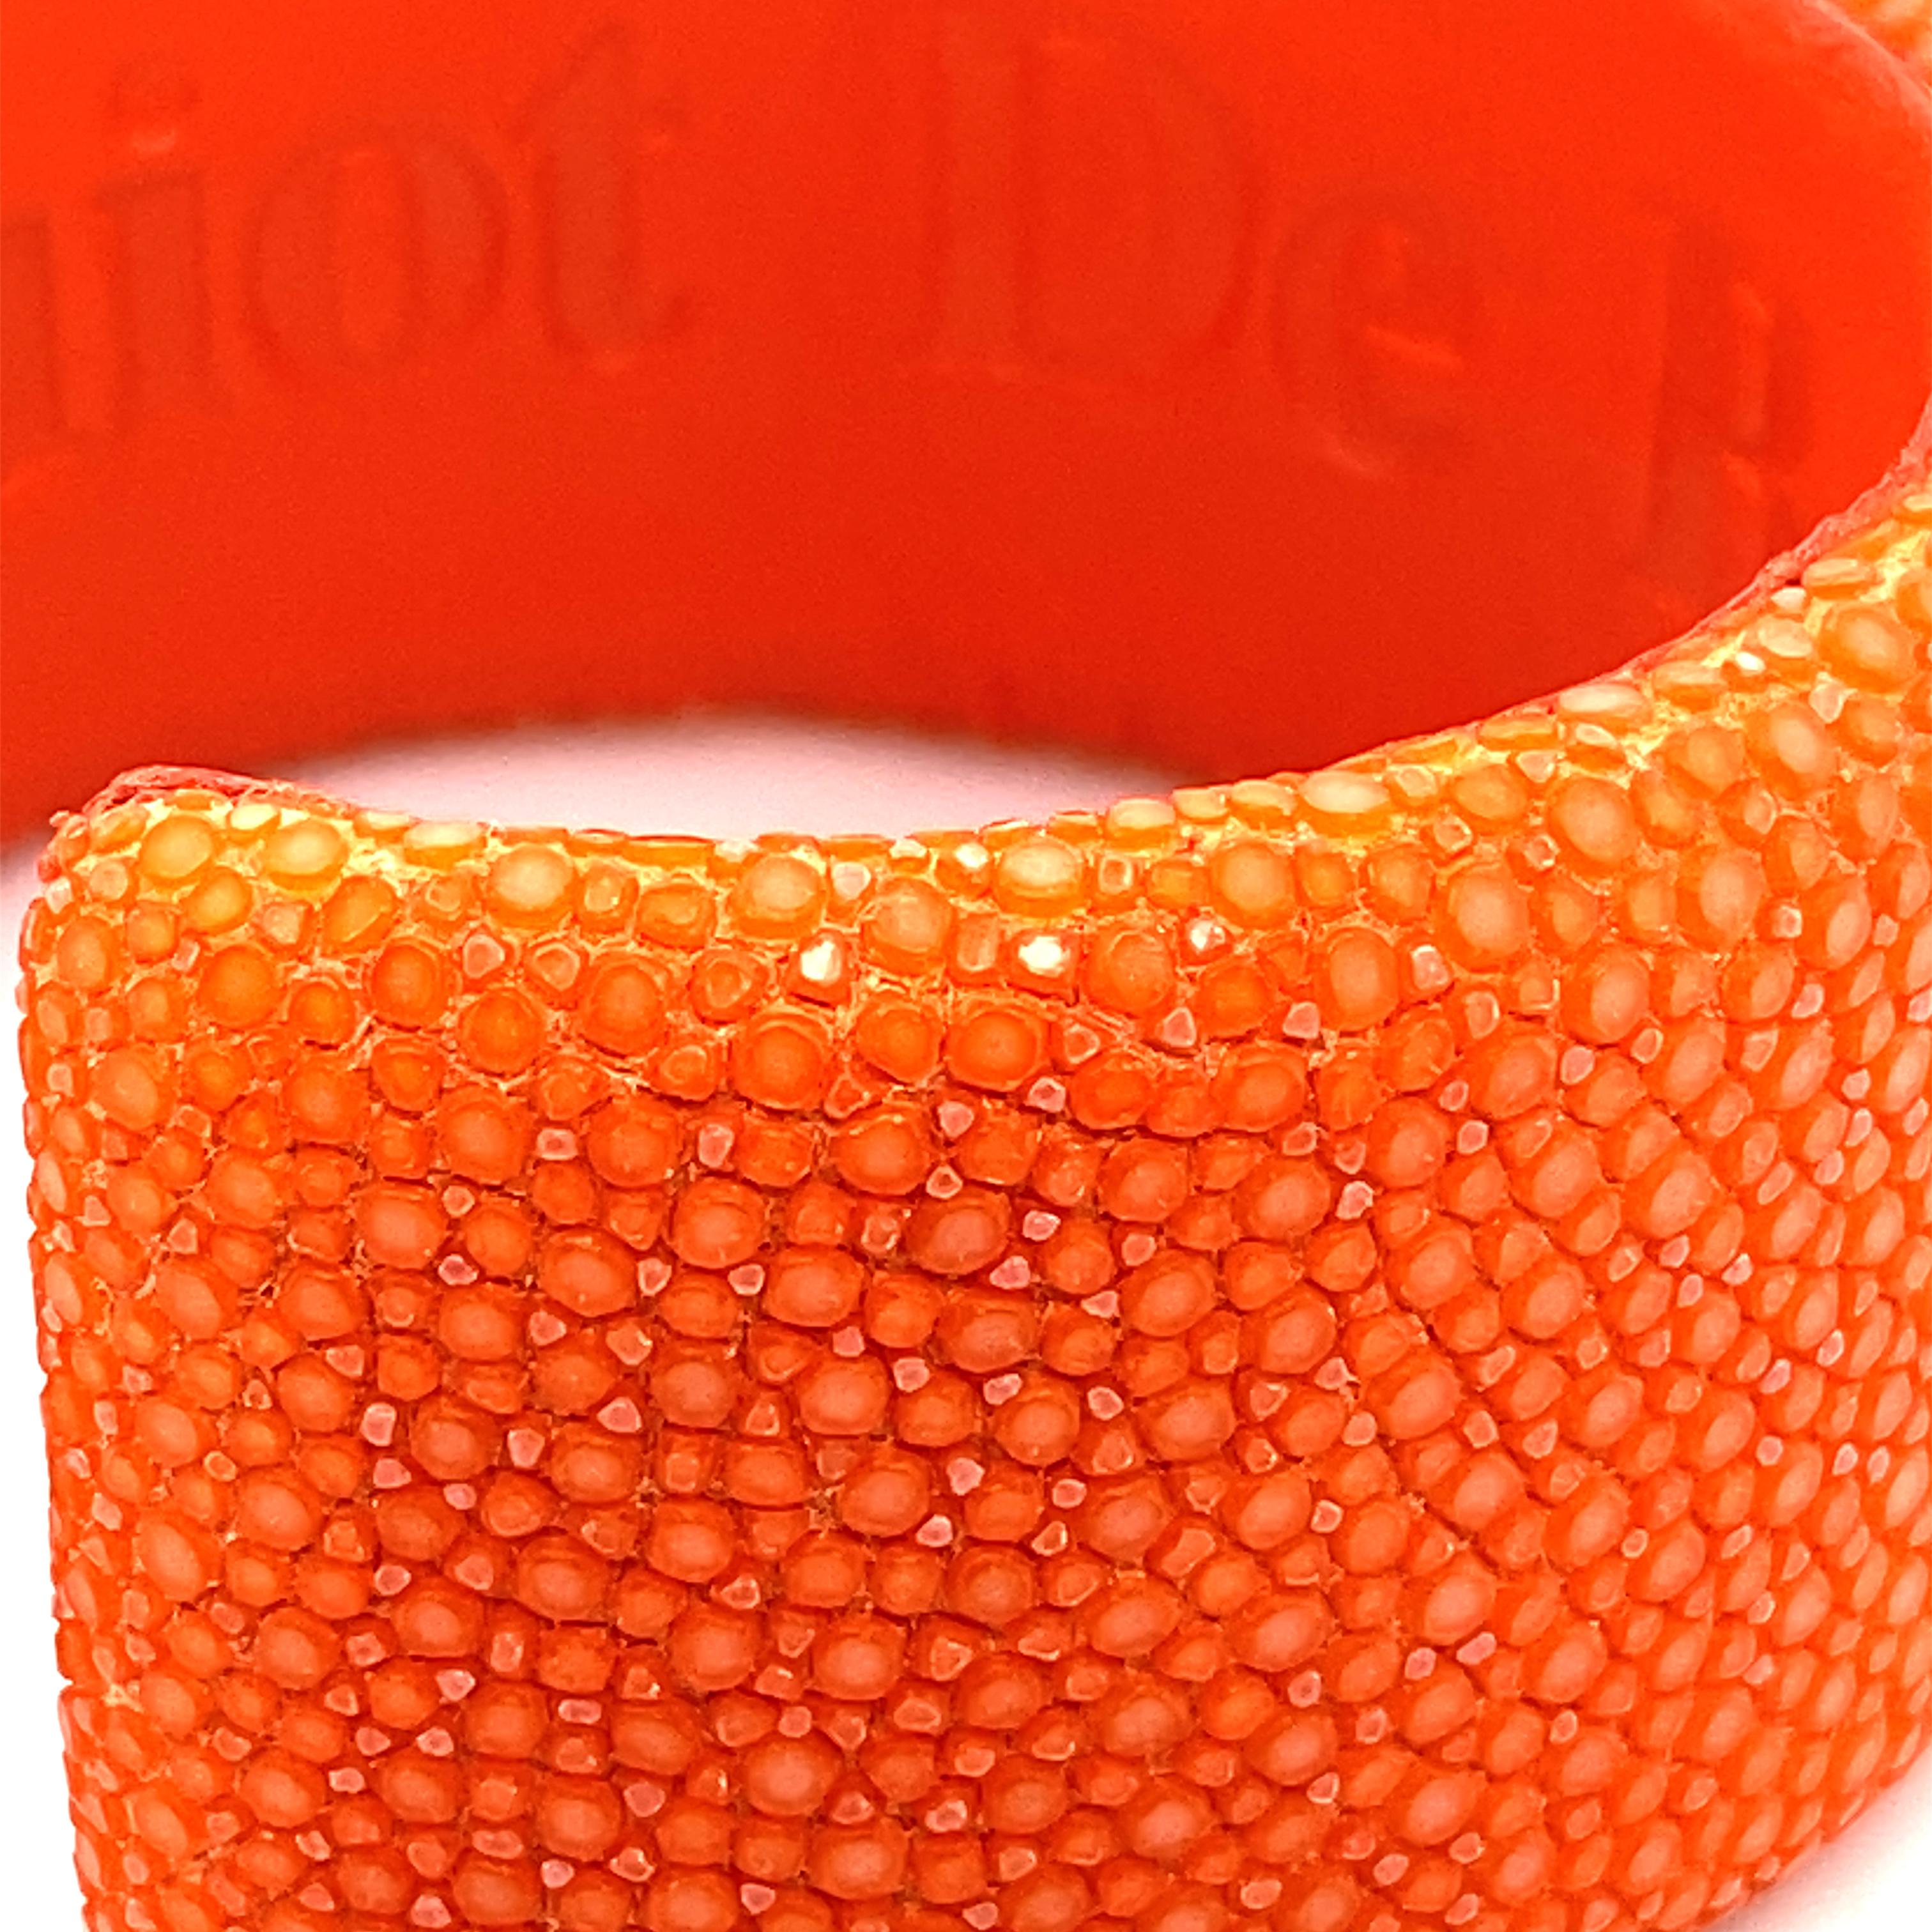 The orange stingray cuff bracelet is a true masterpiece of craftsmanship, designed for lovers of refined and unique jewellery. Made from high-quality stingray, this accessory has a distinct texture and a vibrant orange hue that is sure to catch the